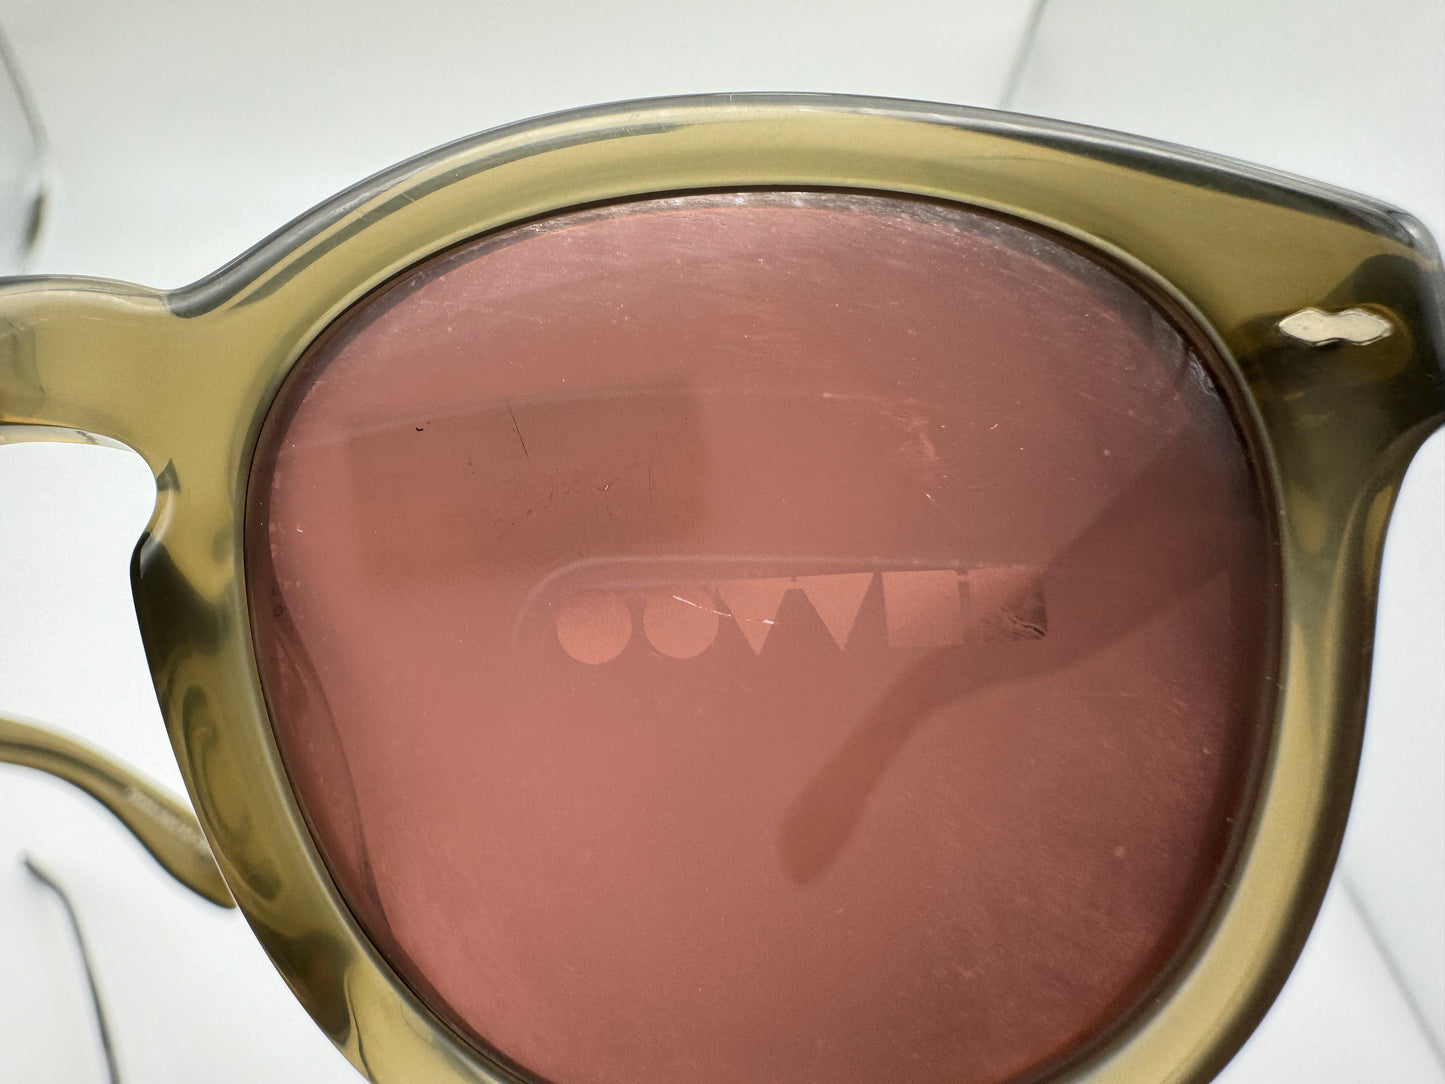 OLIVER PEOPLES CARY GRANT SUN 54mm OV 5413SU   1678C5 Preowned